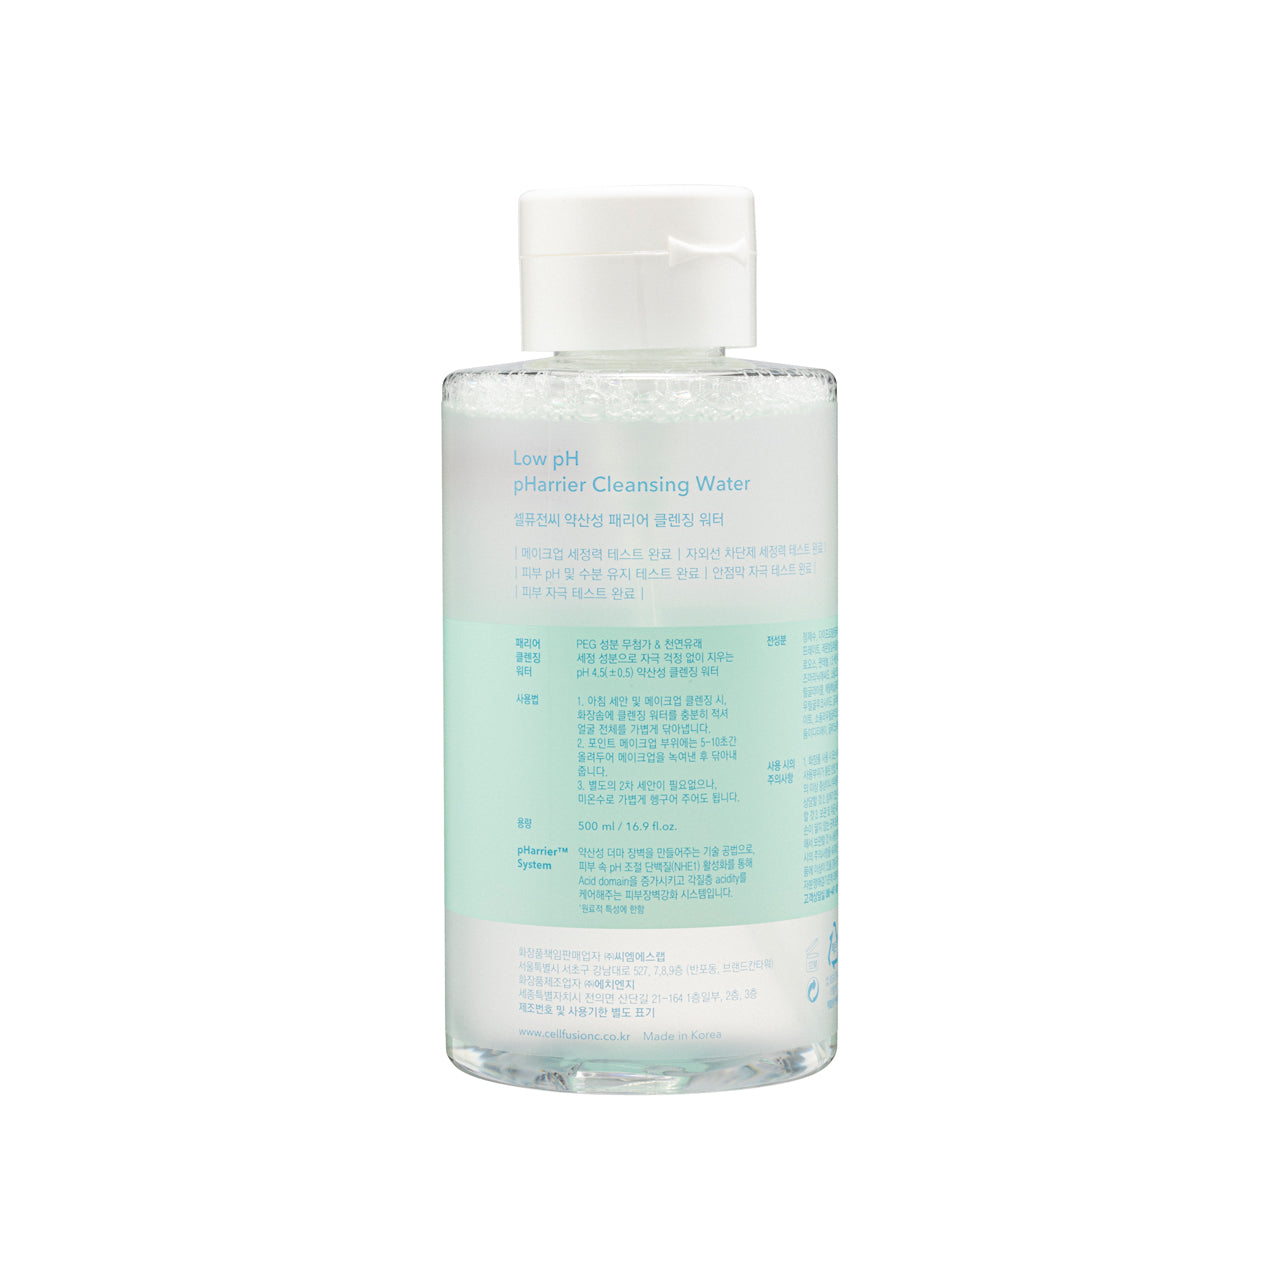 Cell Fusion C Low Ph Pharrier Cleansing Water 500ML | Sasa Global eShop